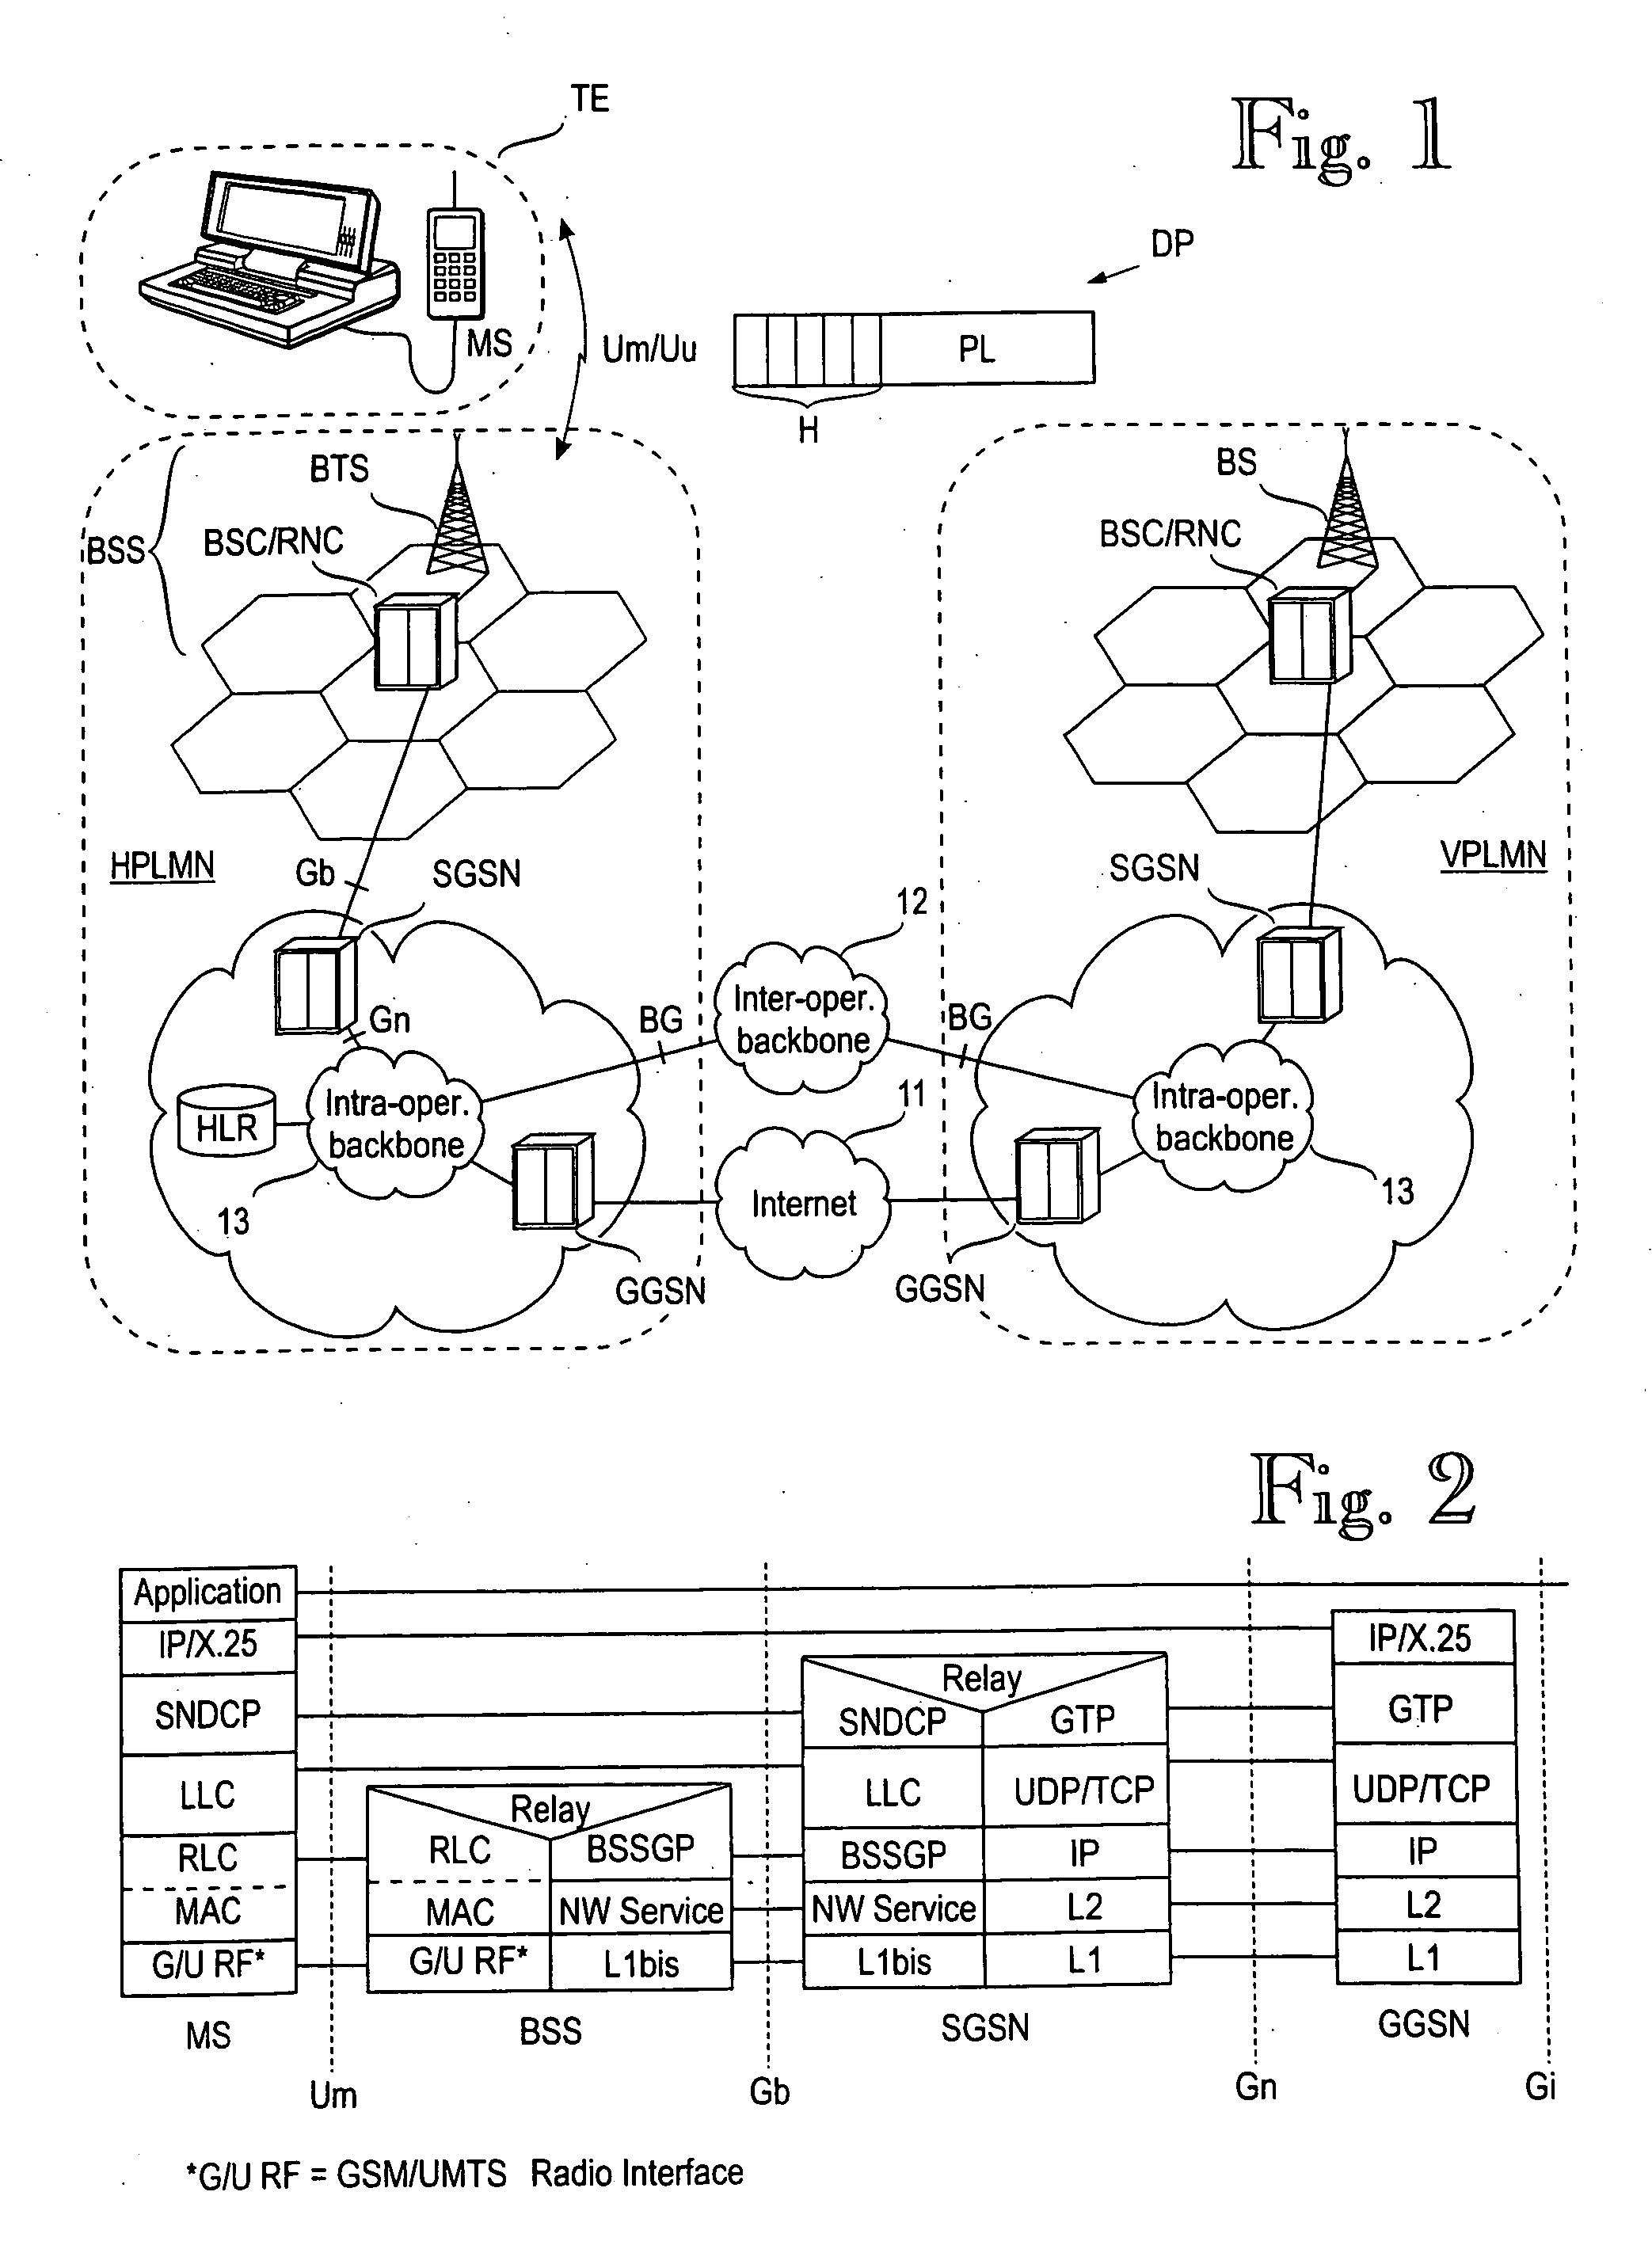 Transporting QoS mapping information in a packet radio network